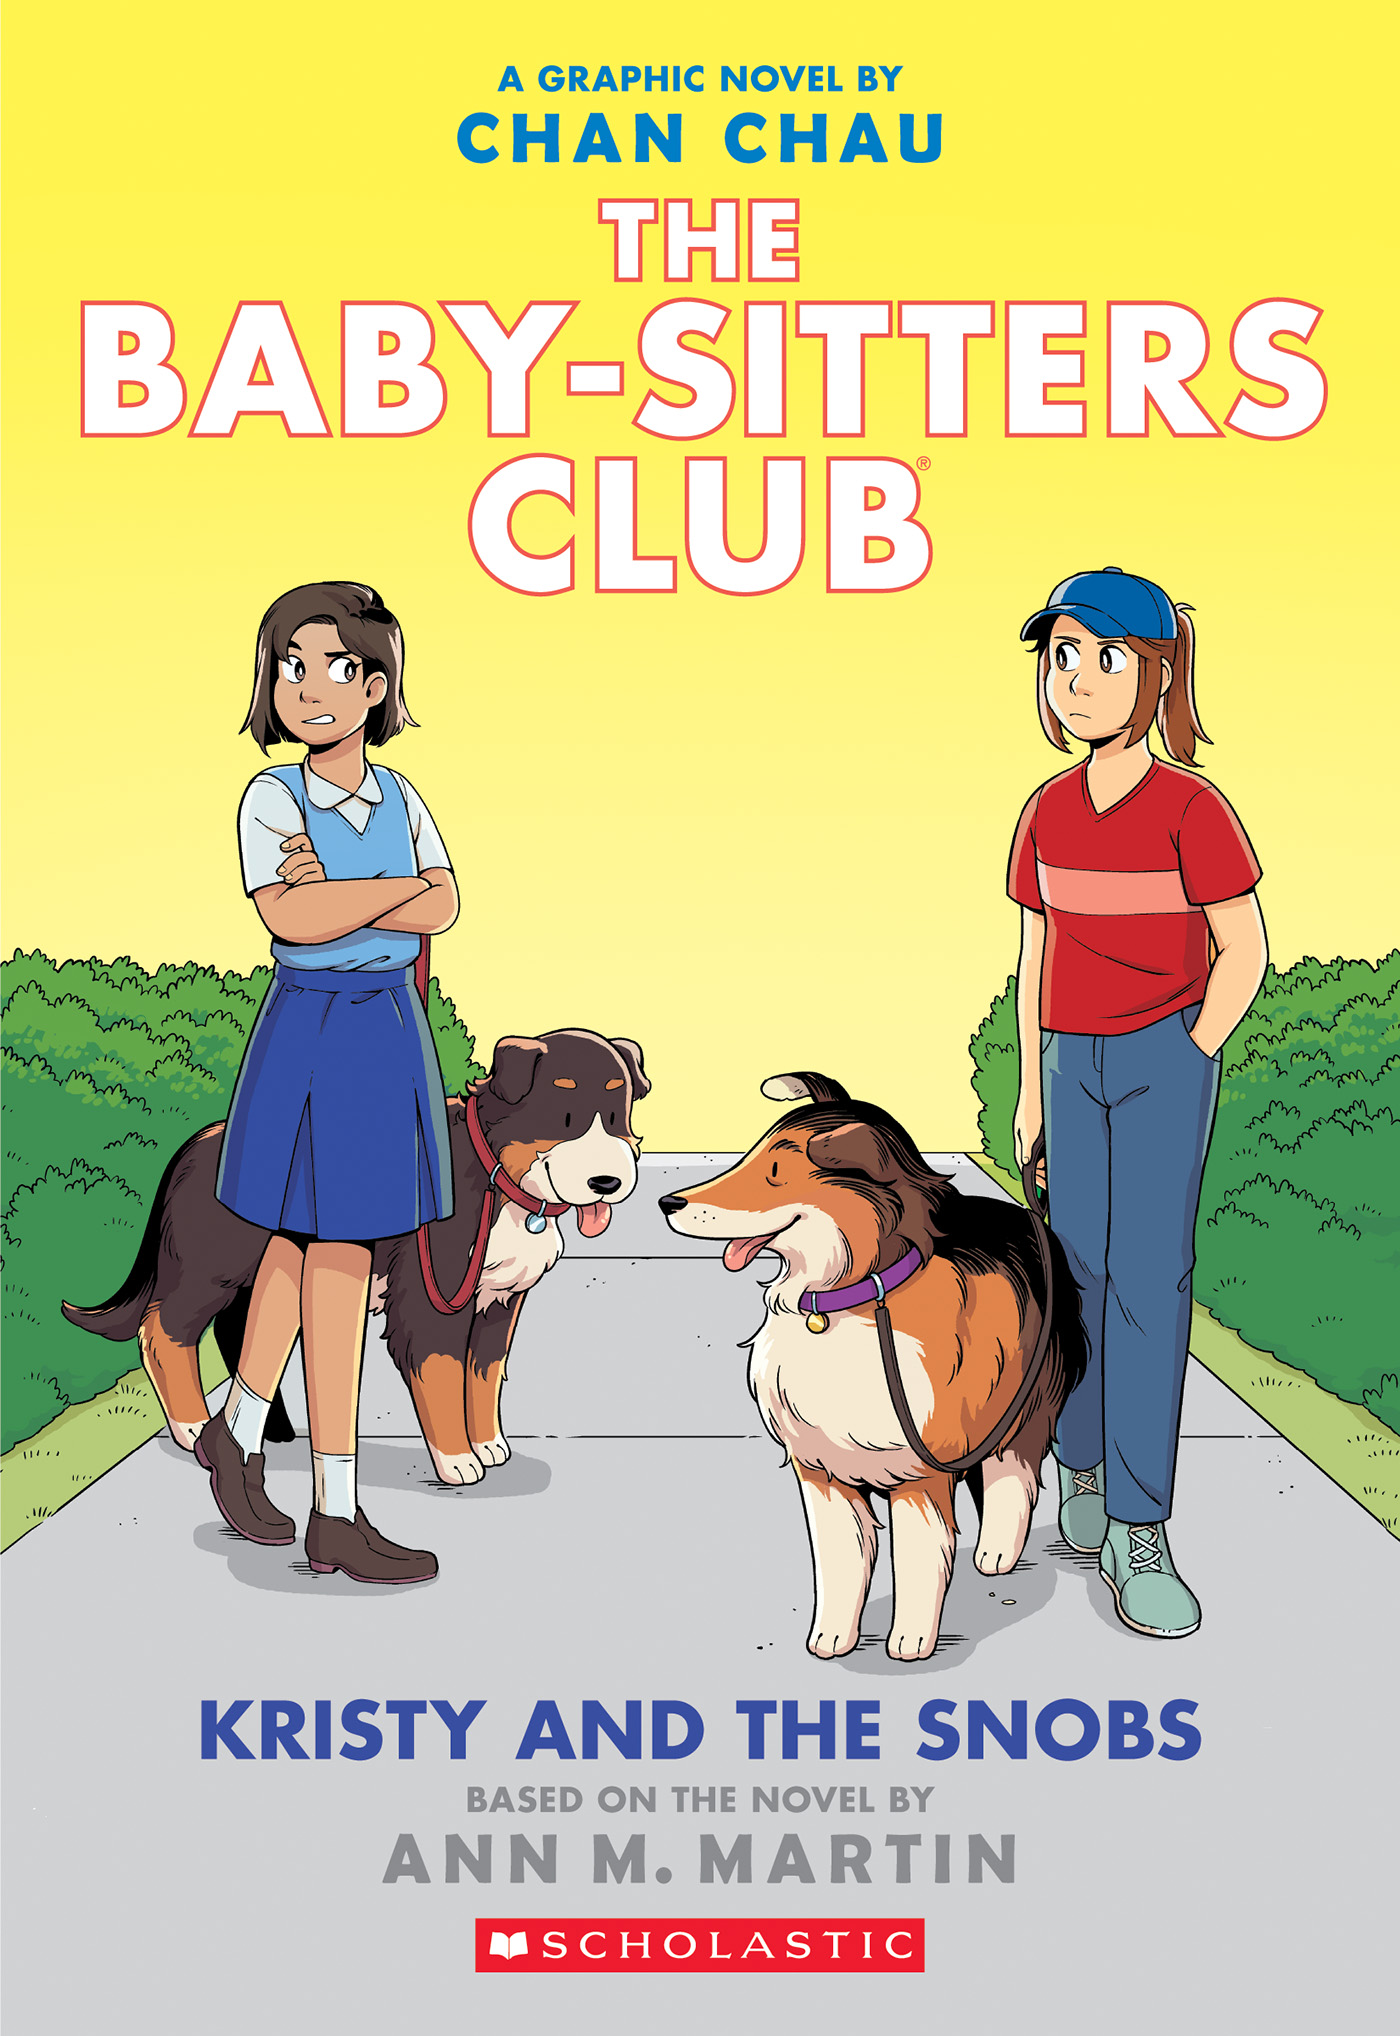 Kristy and the Snobs: A Graphic Novel (Baby-sitters Club #10) cover image